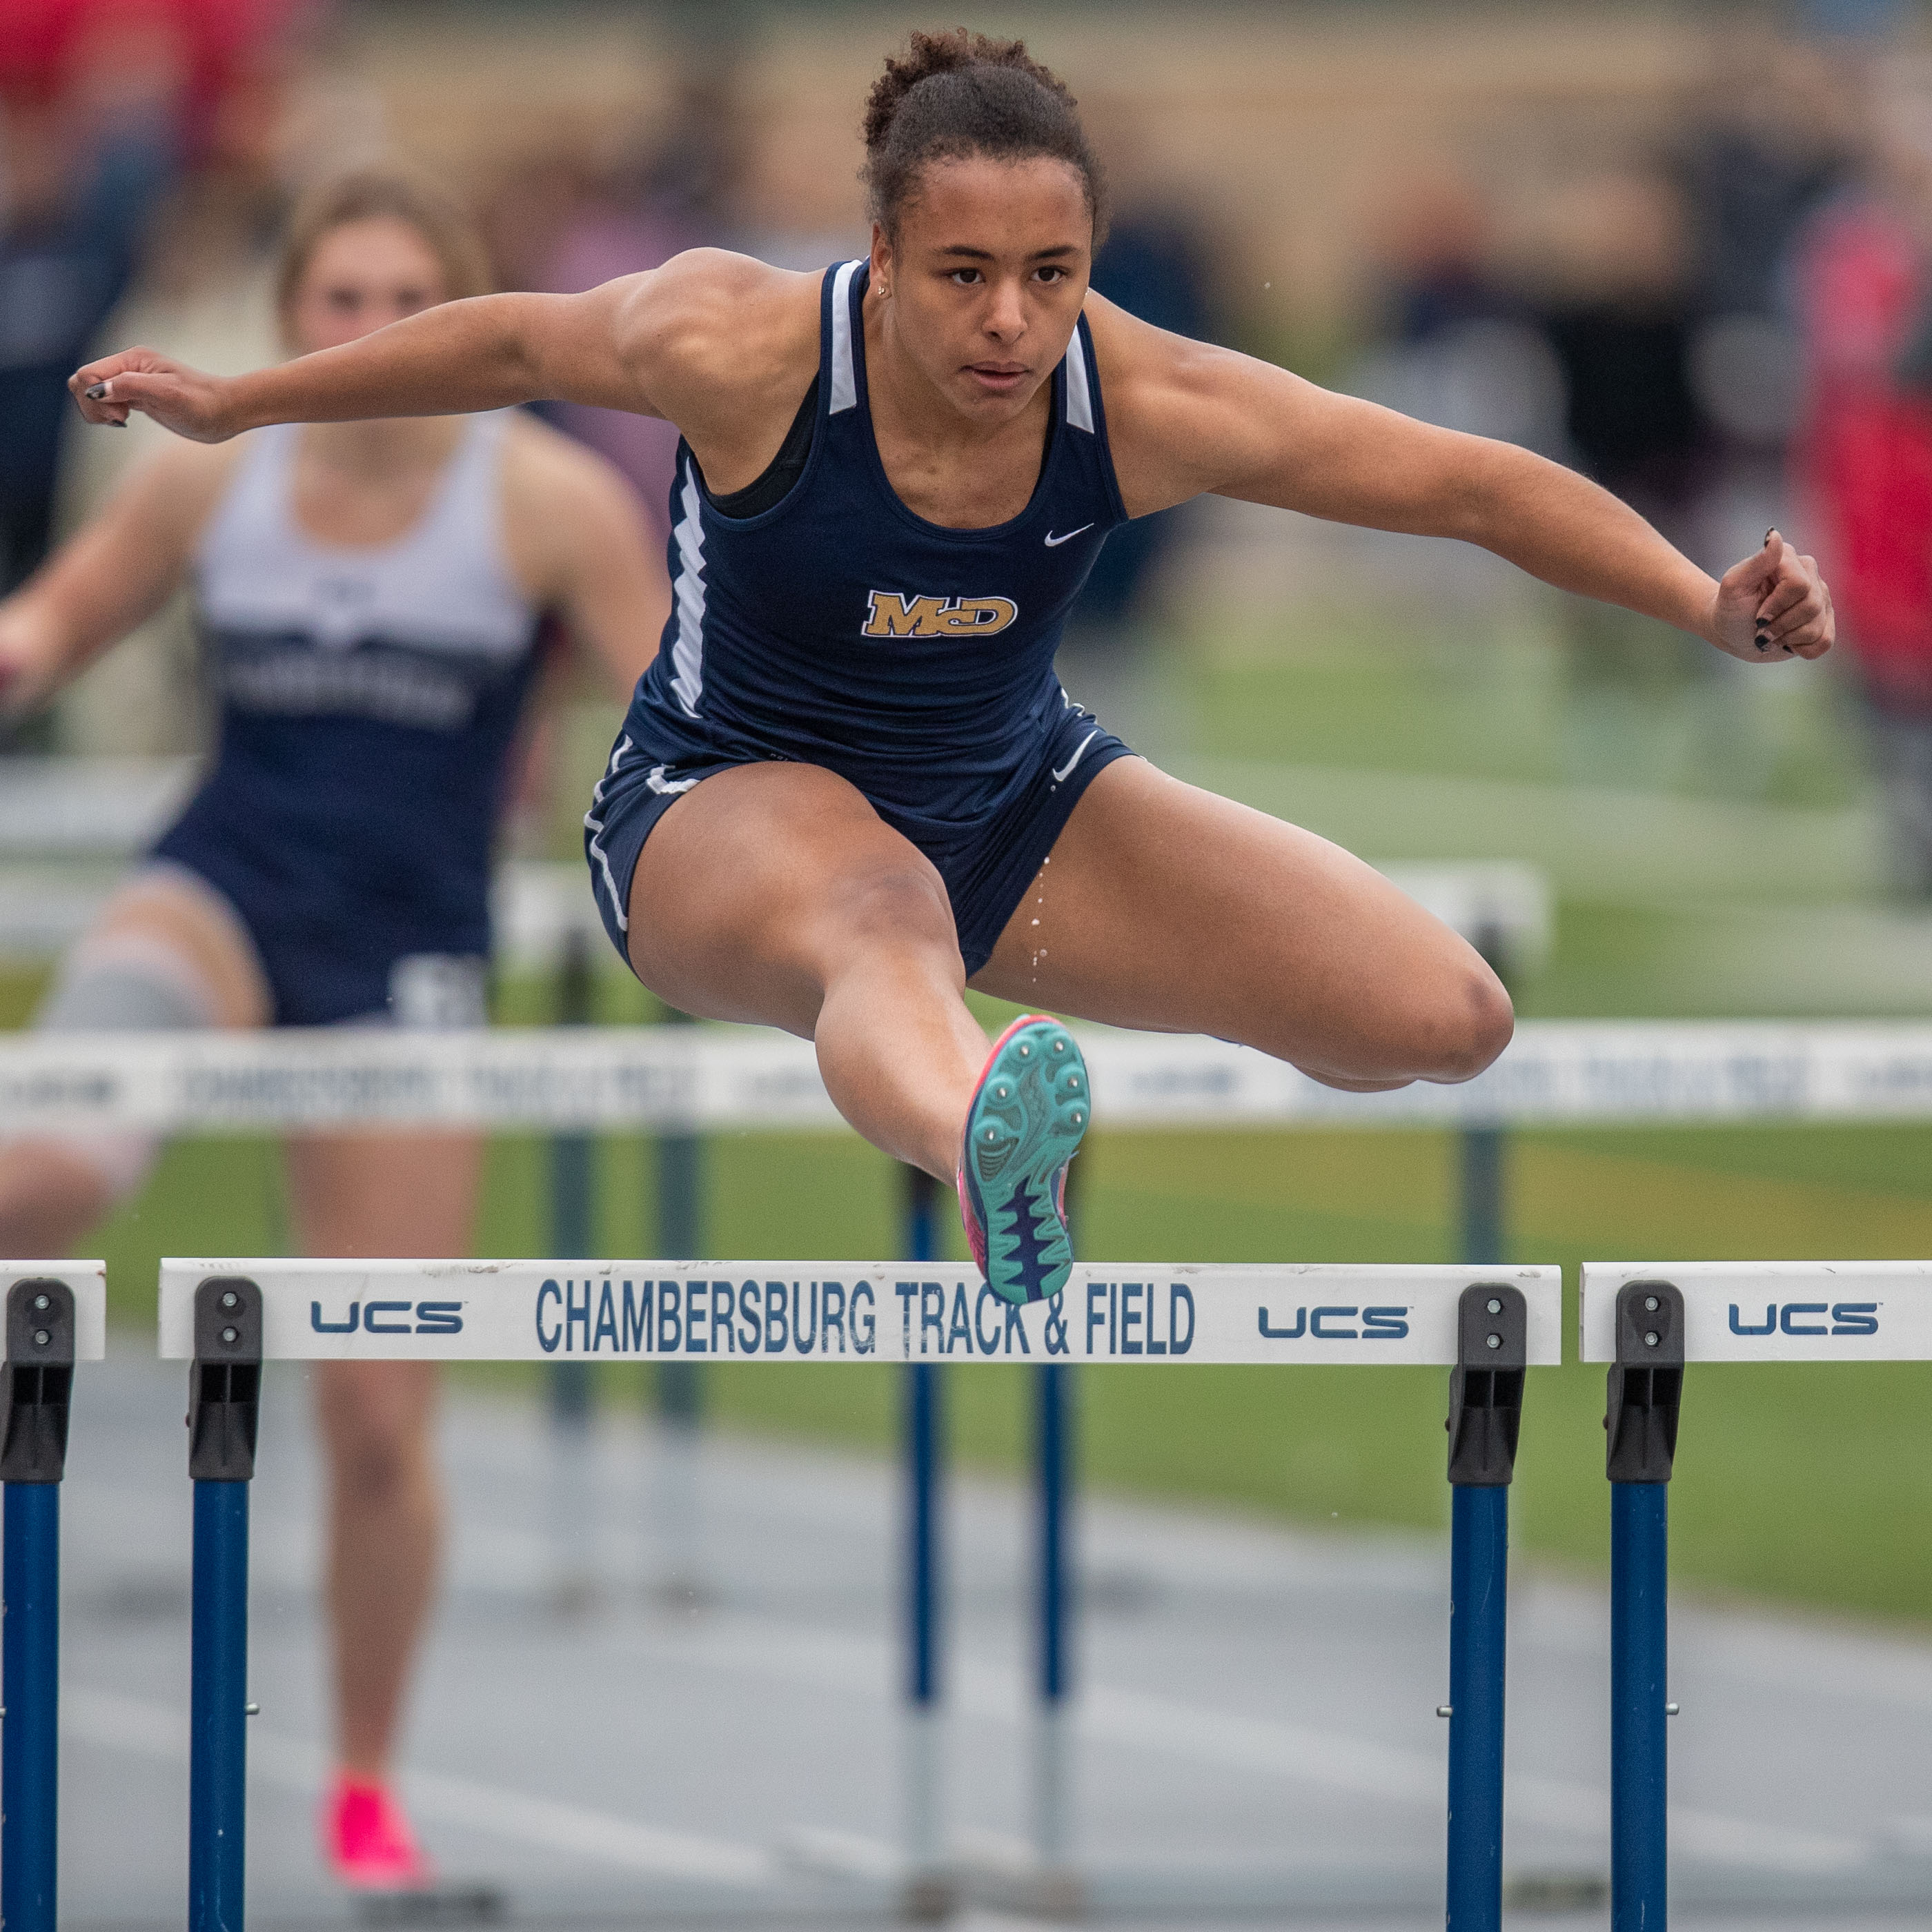 Maddy Brooks, Bishop McDevitt, wins the 100m hurdles at the 2023 Tim Cook Memorial Invitational track & field meet at Chambersburg, Pa., Mar. 25, 2023.Mark Pynes | pennlive.com